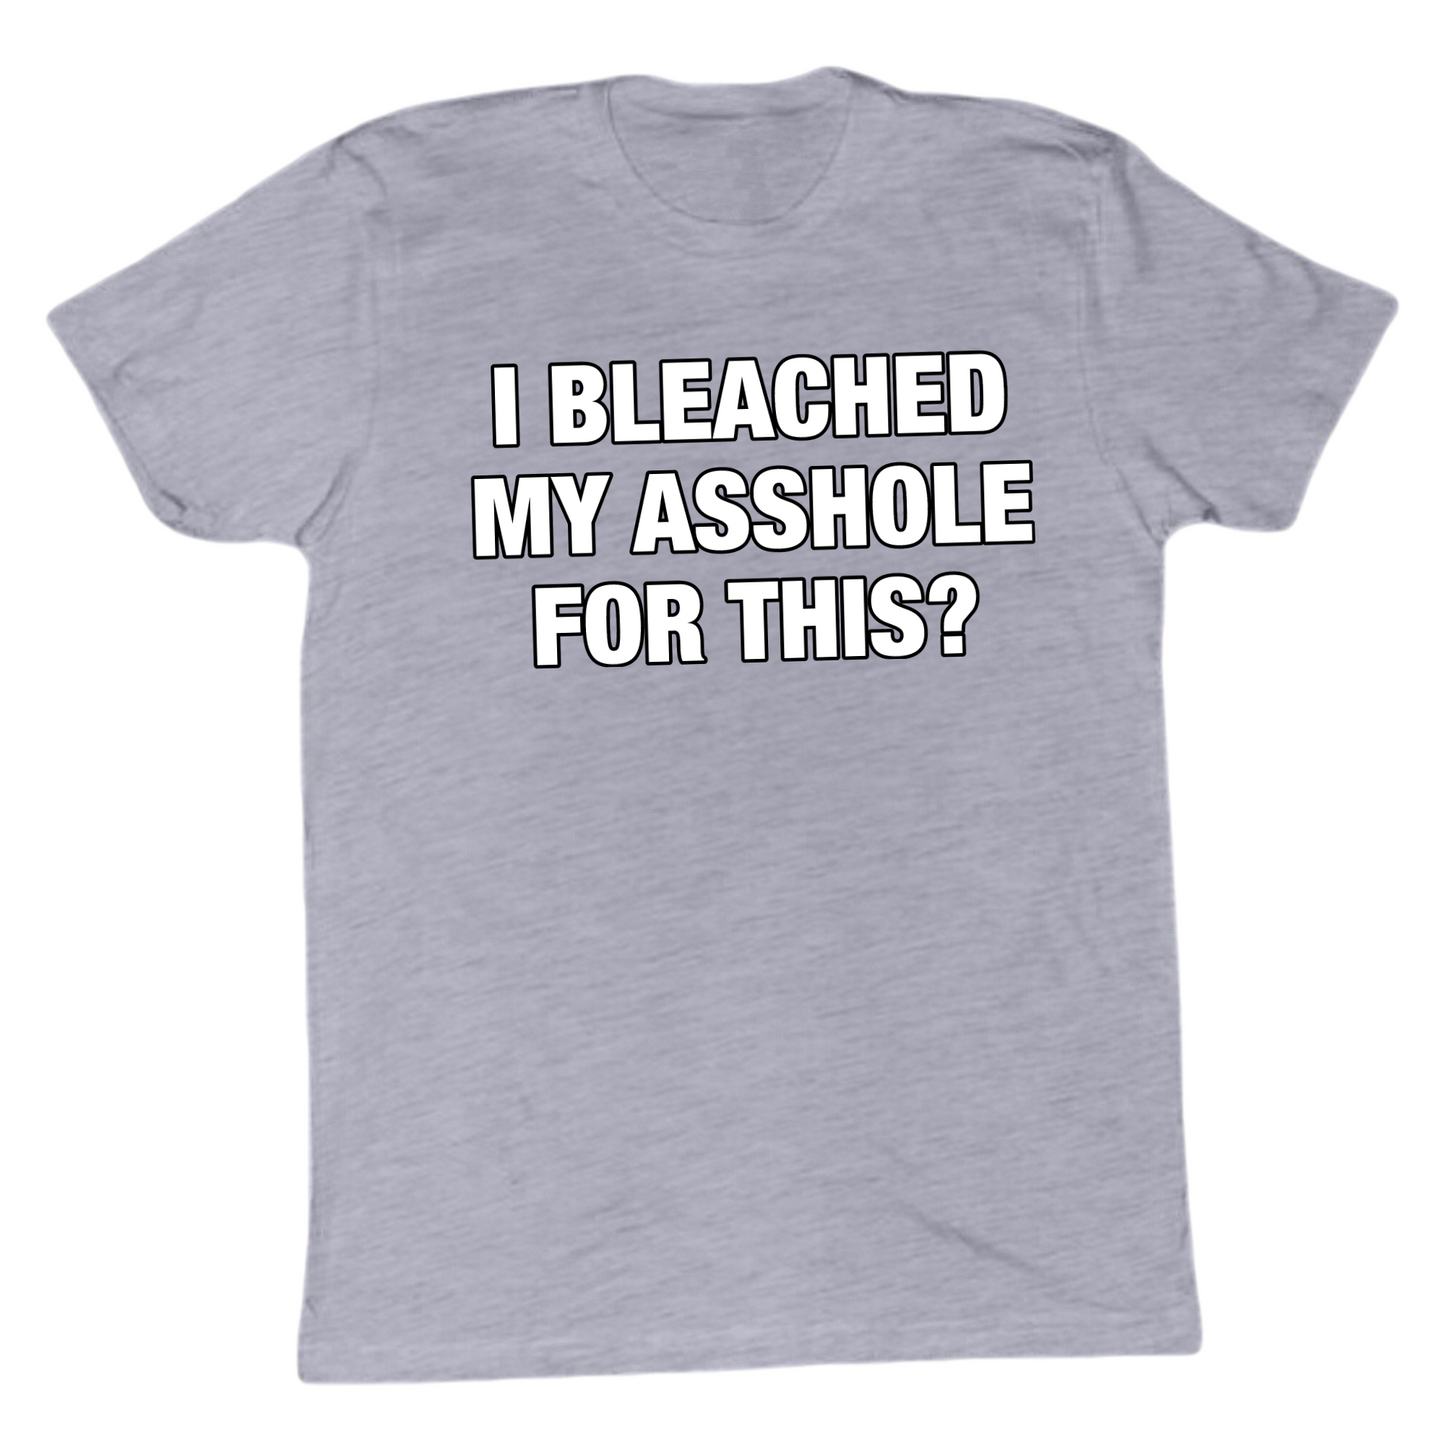 I Bleached My Asshole For This? T-Shirt